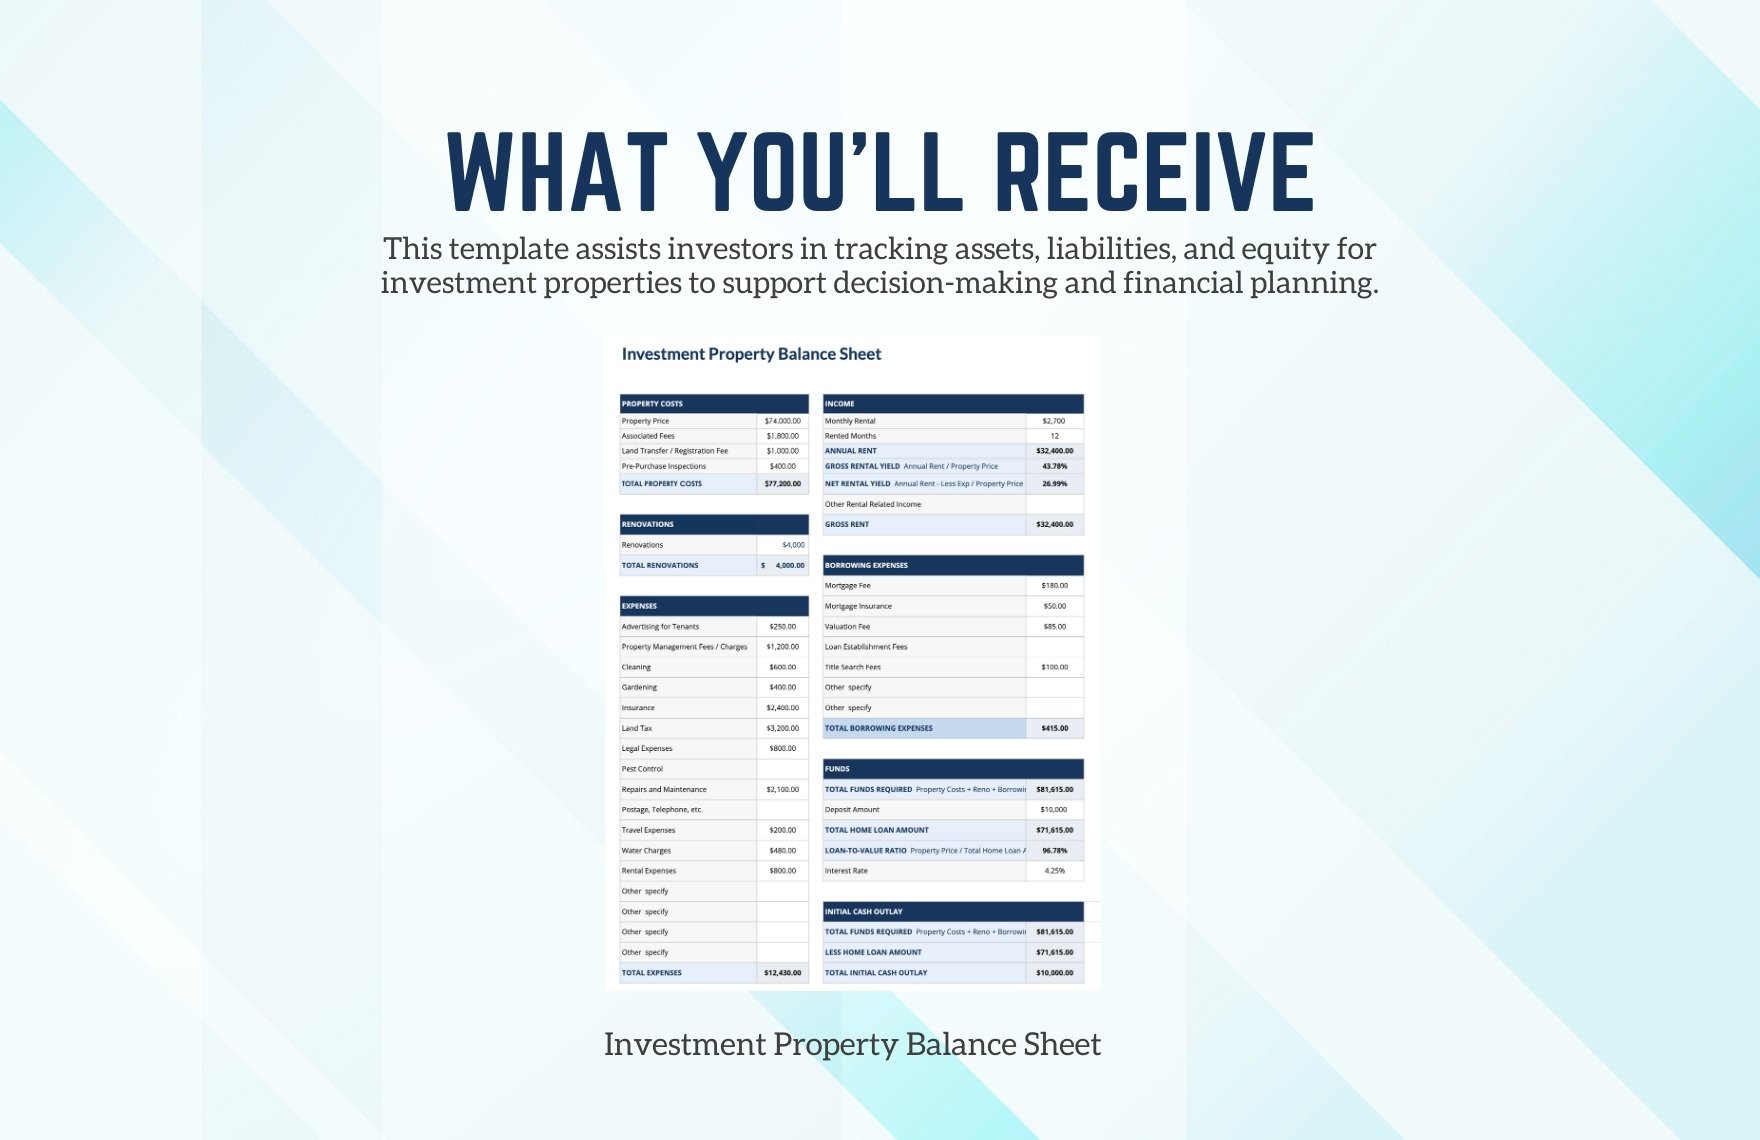 Investment Property Balance Sheet Template